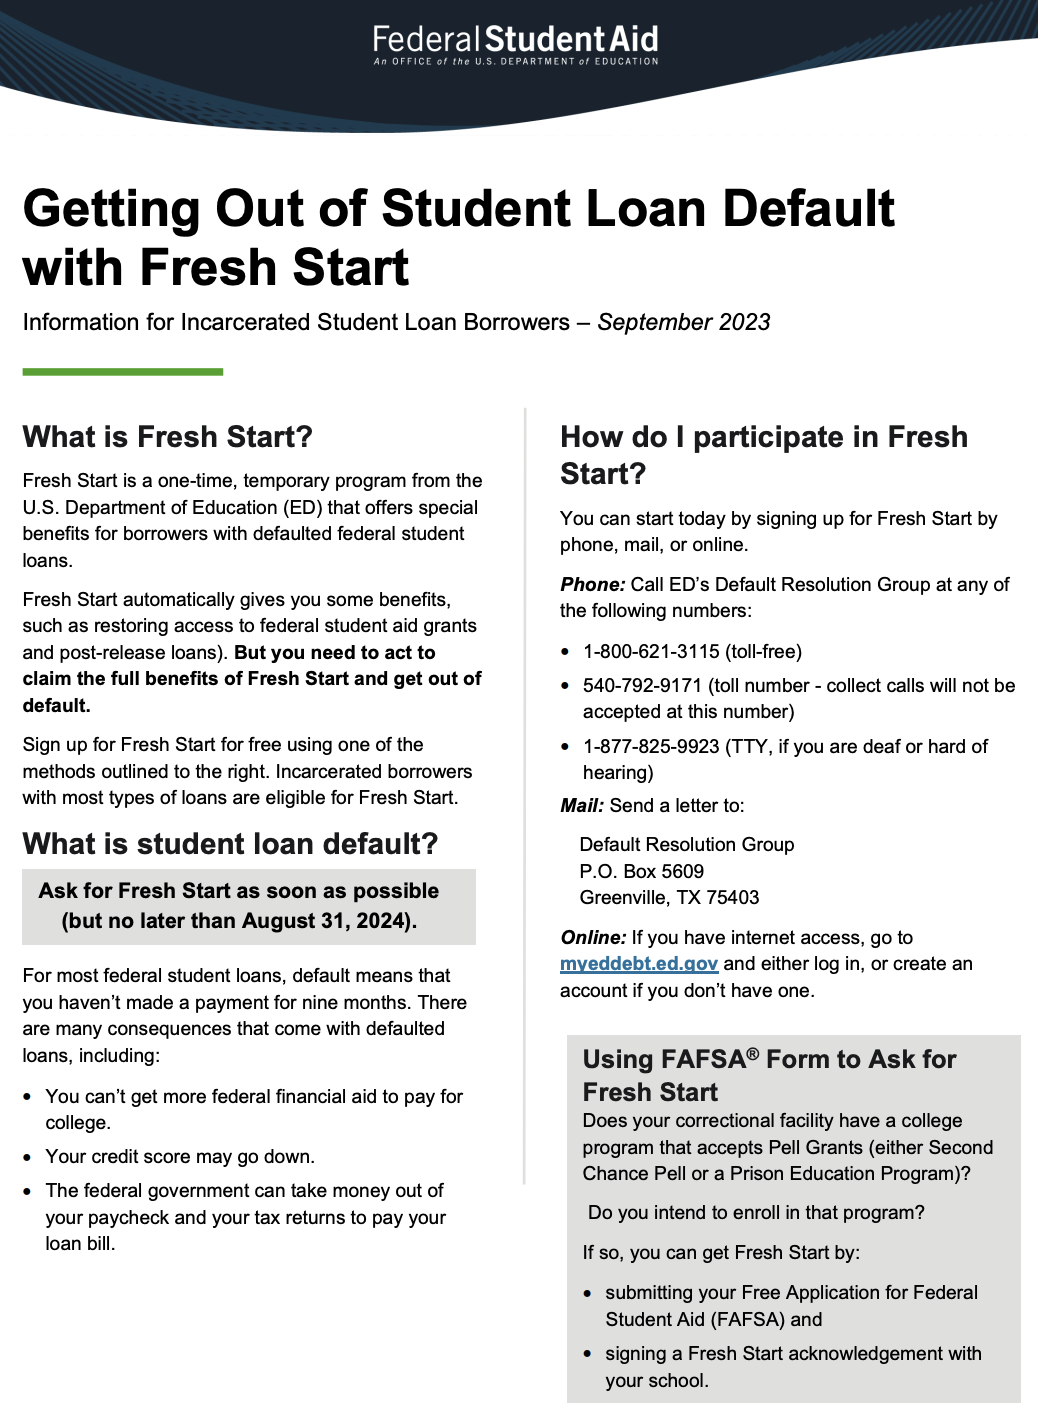 Getting Out of Student Loan Default with Fresh Start 